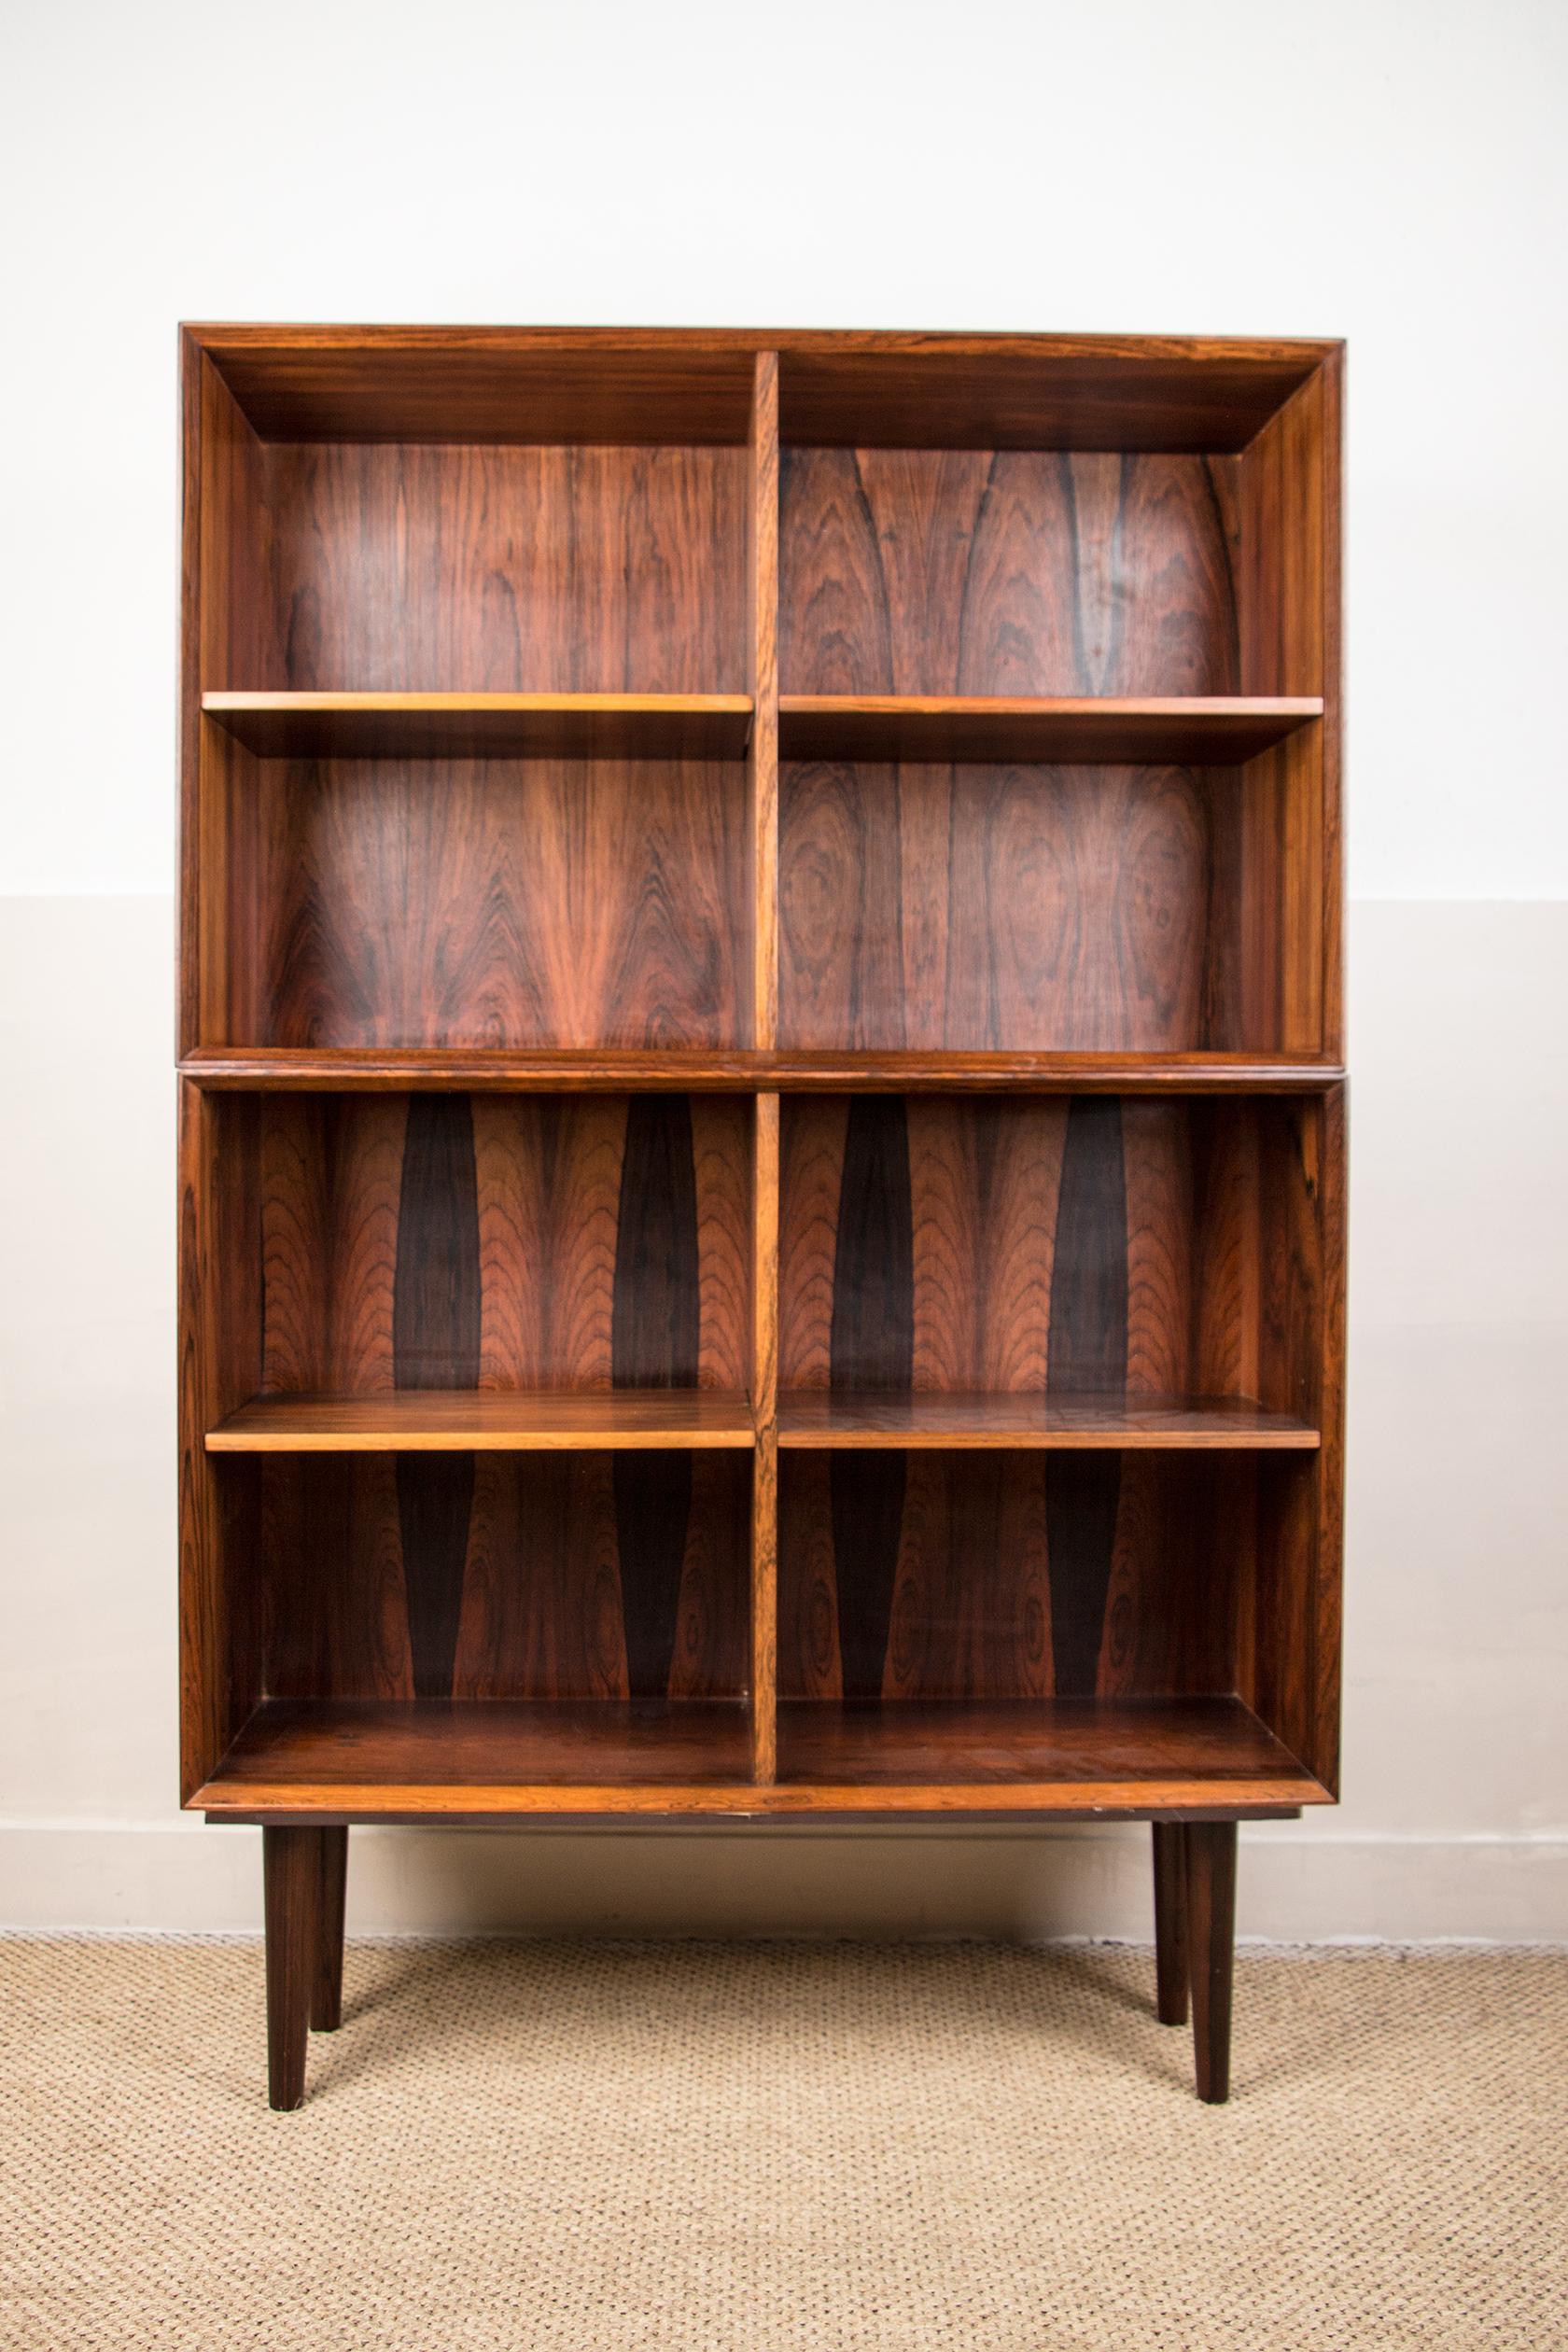 Pretty bookcase unit made up of two stacked boxes with 2 x 4 inches and height-adjustable shelves that rest on a base that unscrews. Splendid design, sober and very refined.